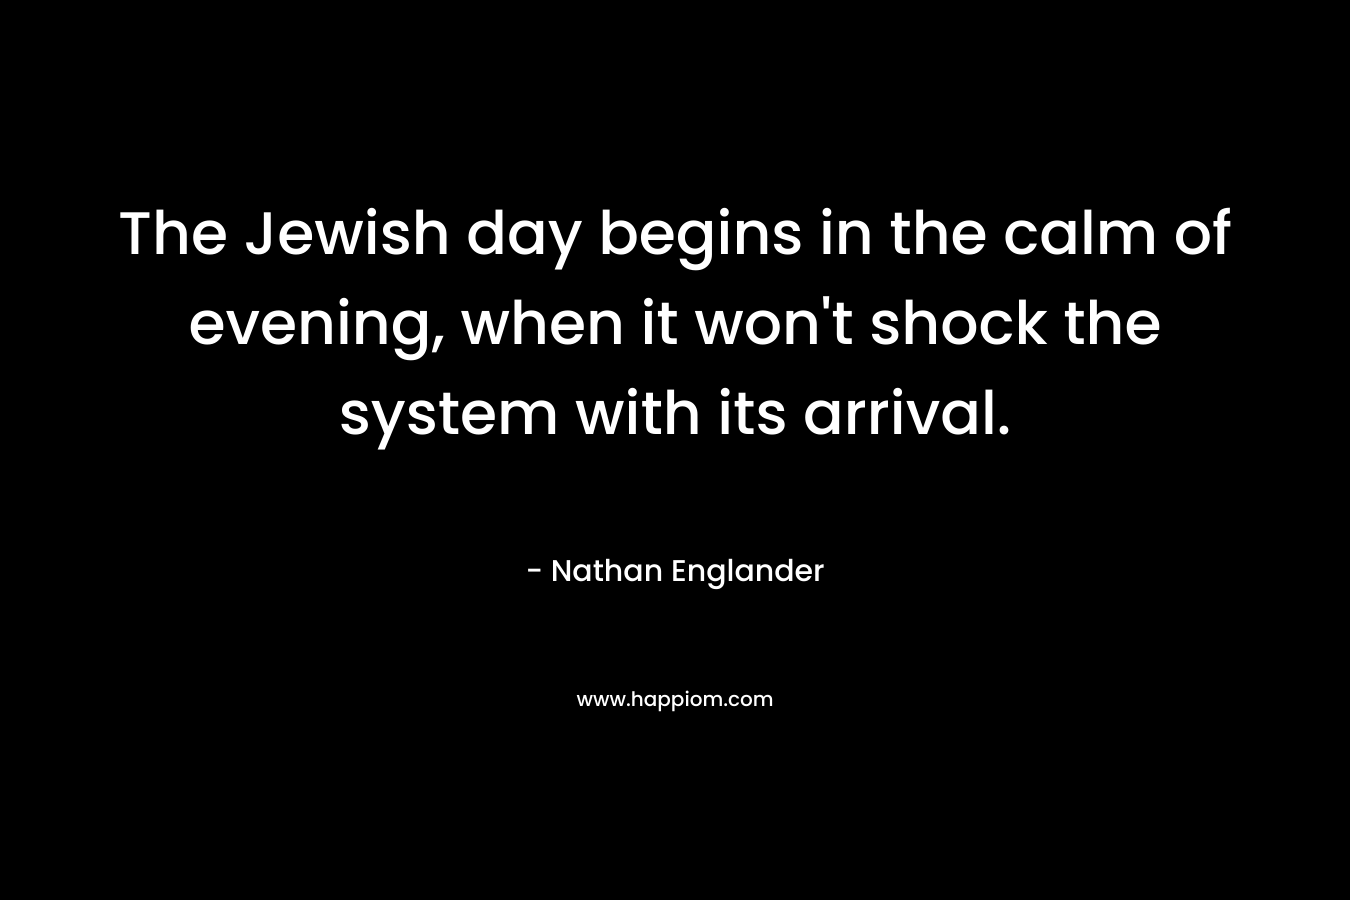 The Jewish day begins in the calm of evening, when it won’t shock the system with its arrival. – Nathan Englander